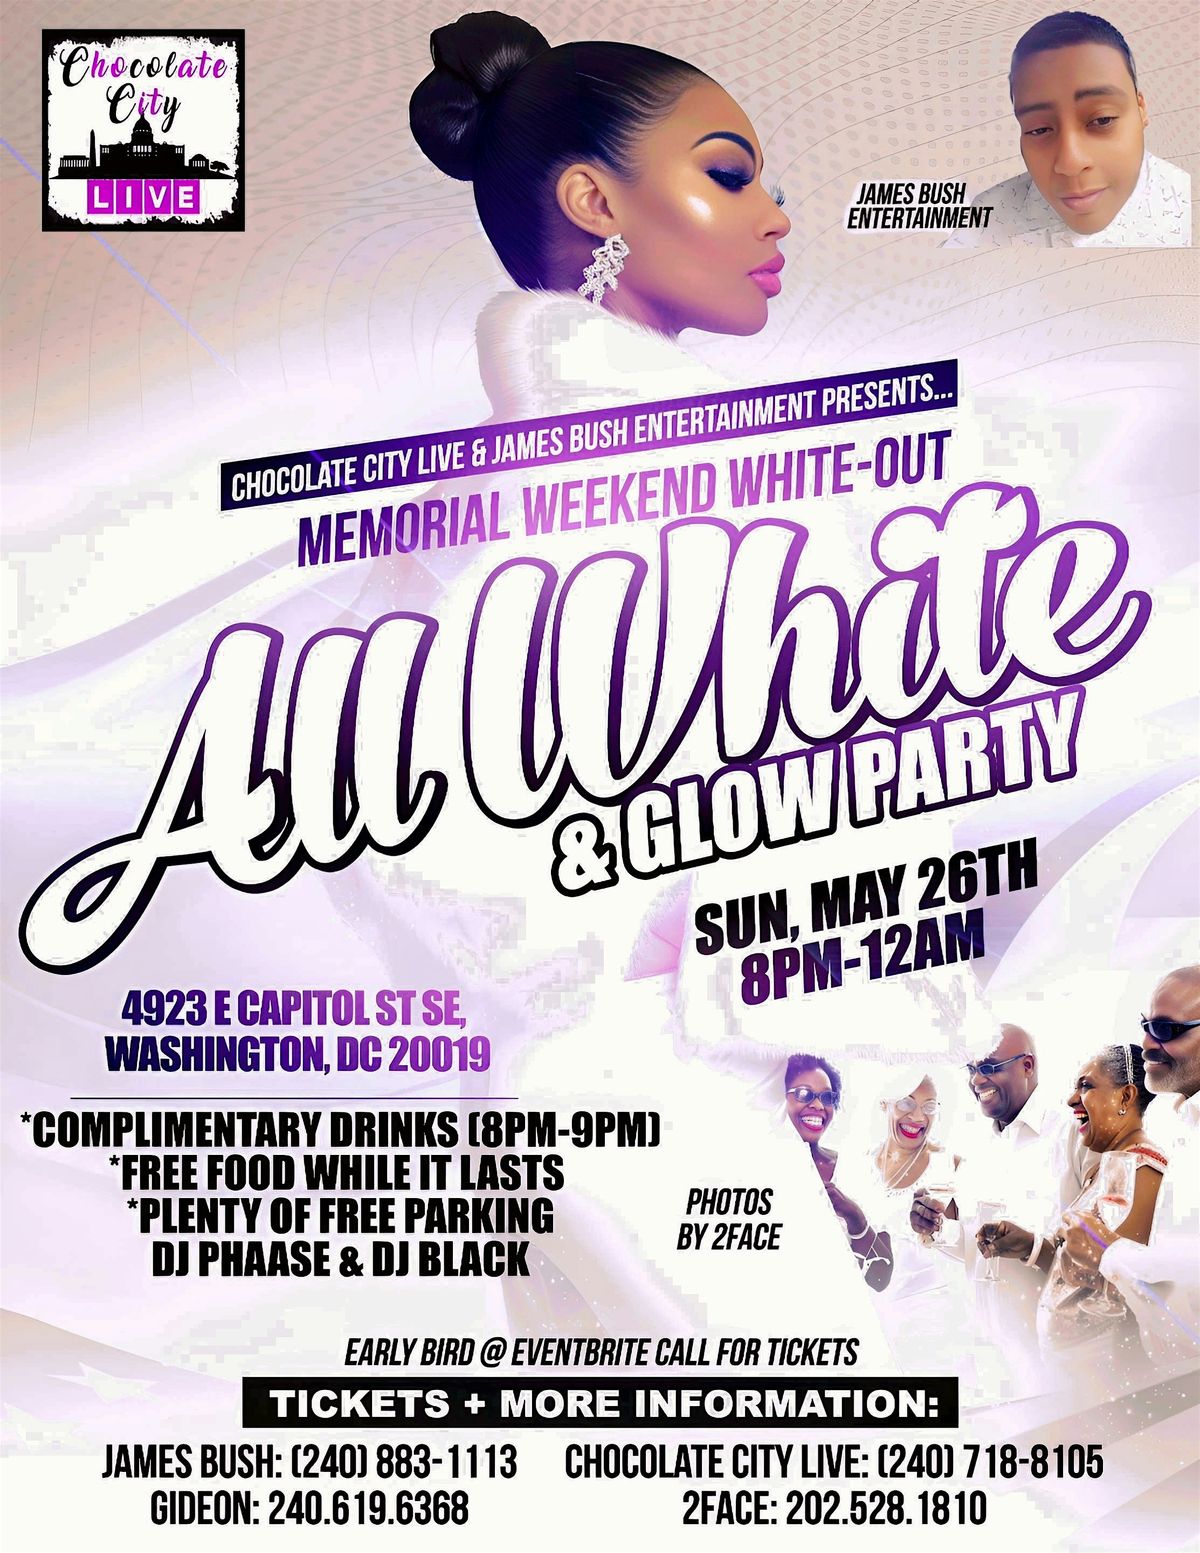 MEMORIAL WEEKEND WHITEOUT: ALL WHITE & GLOW  PARTY